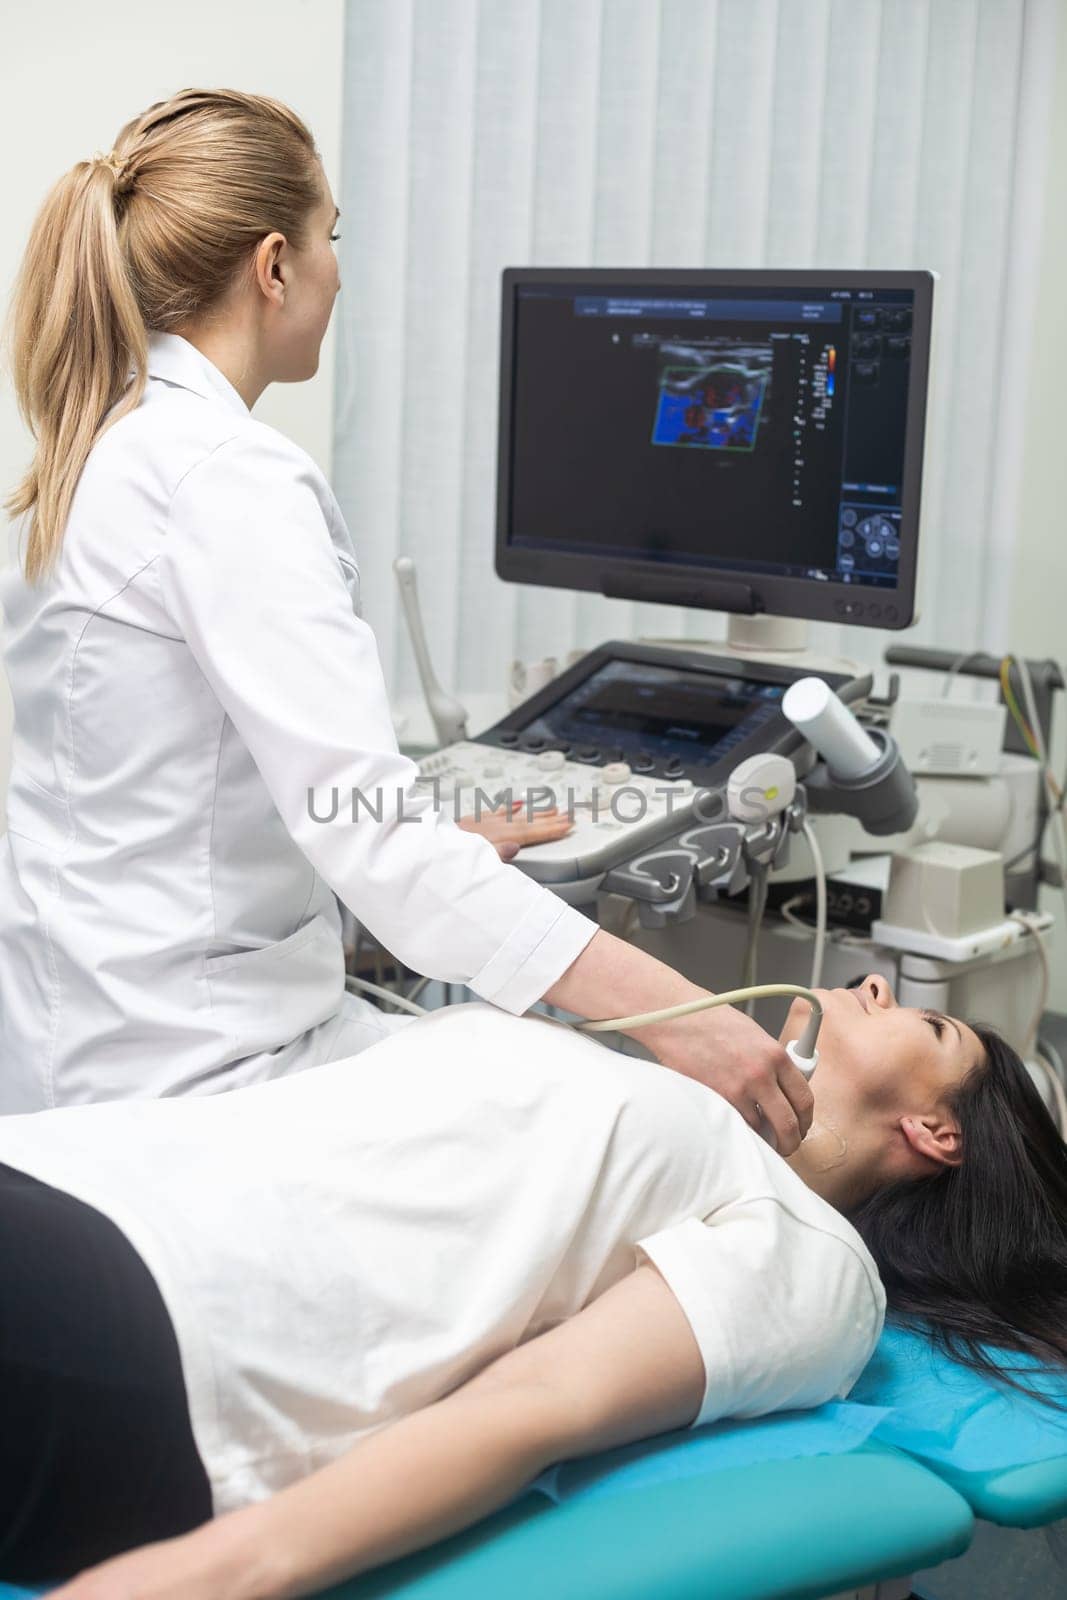 Ultrasound scanner in the hands of a doctor. Diagnostics. Sonography